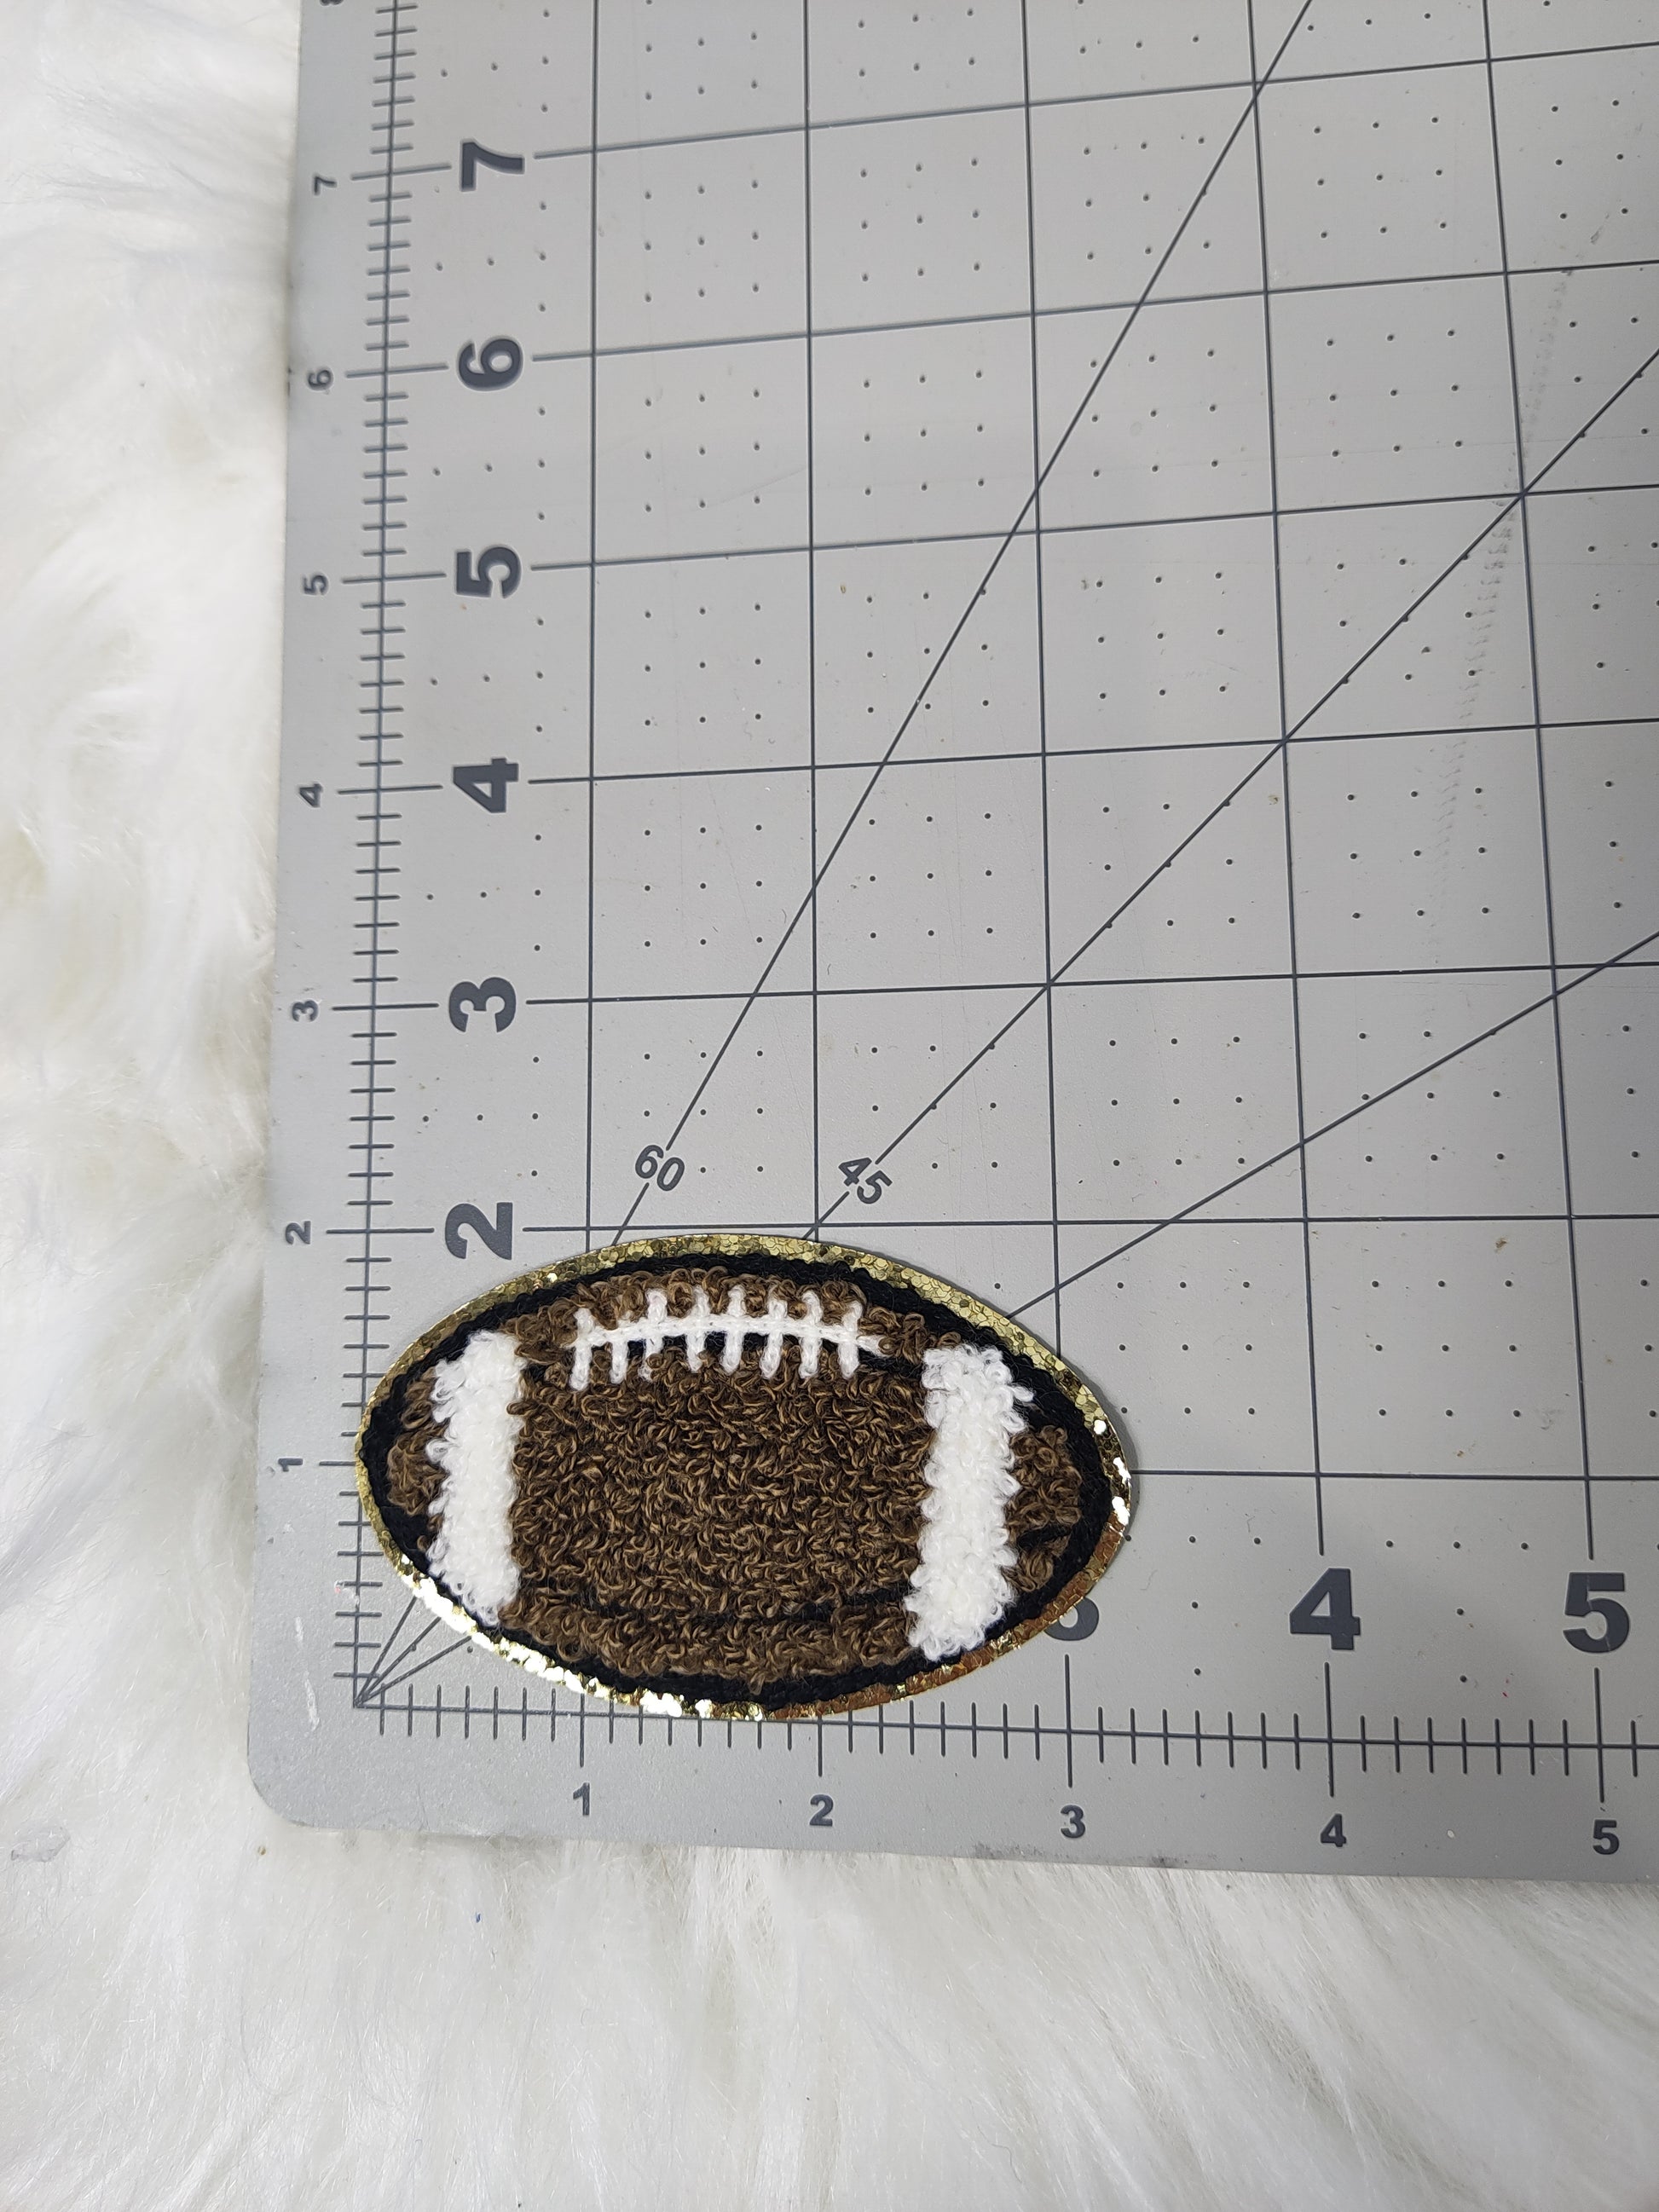 Glitter Football Embroidered Patch — Iron On